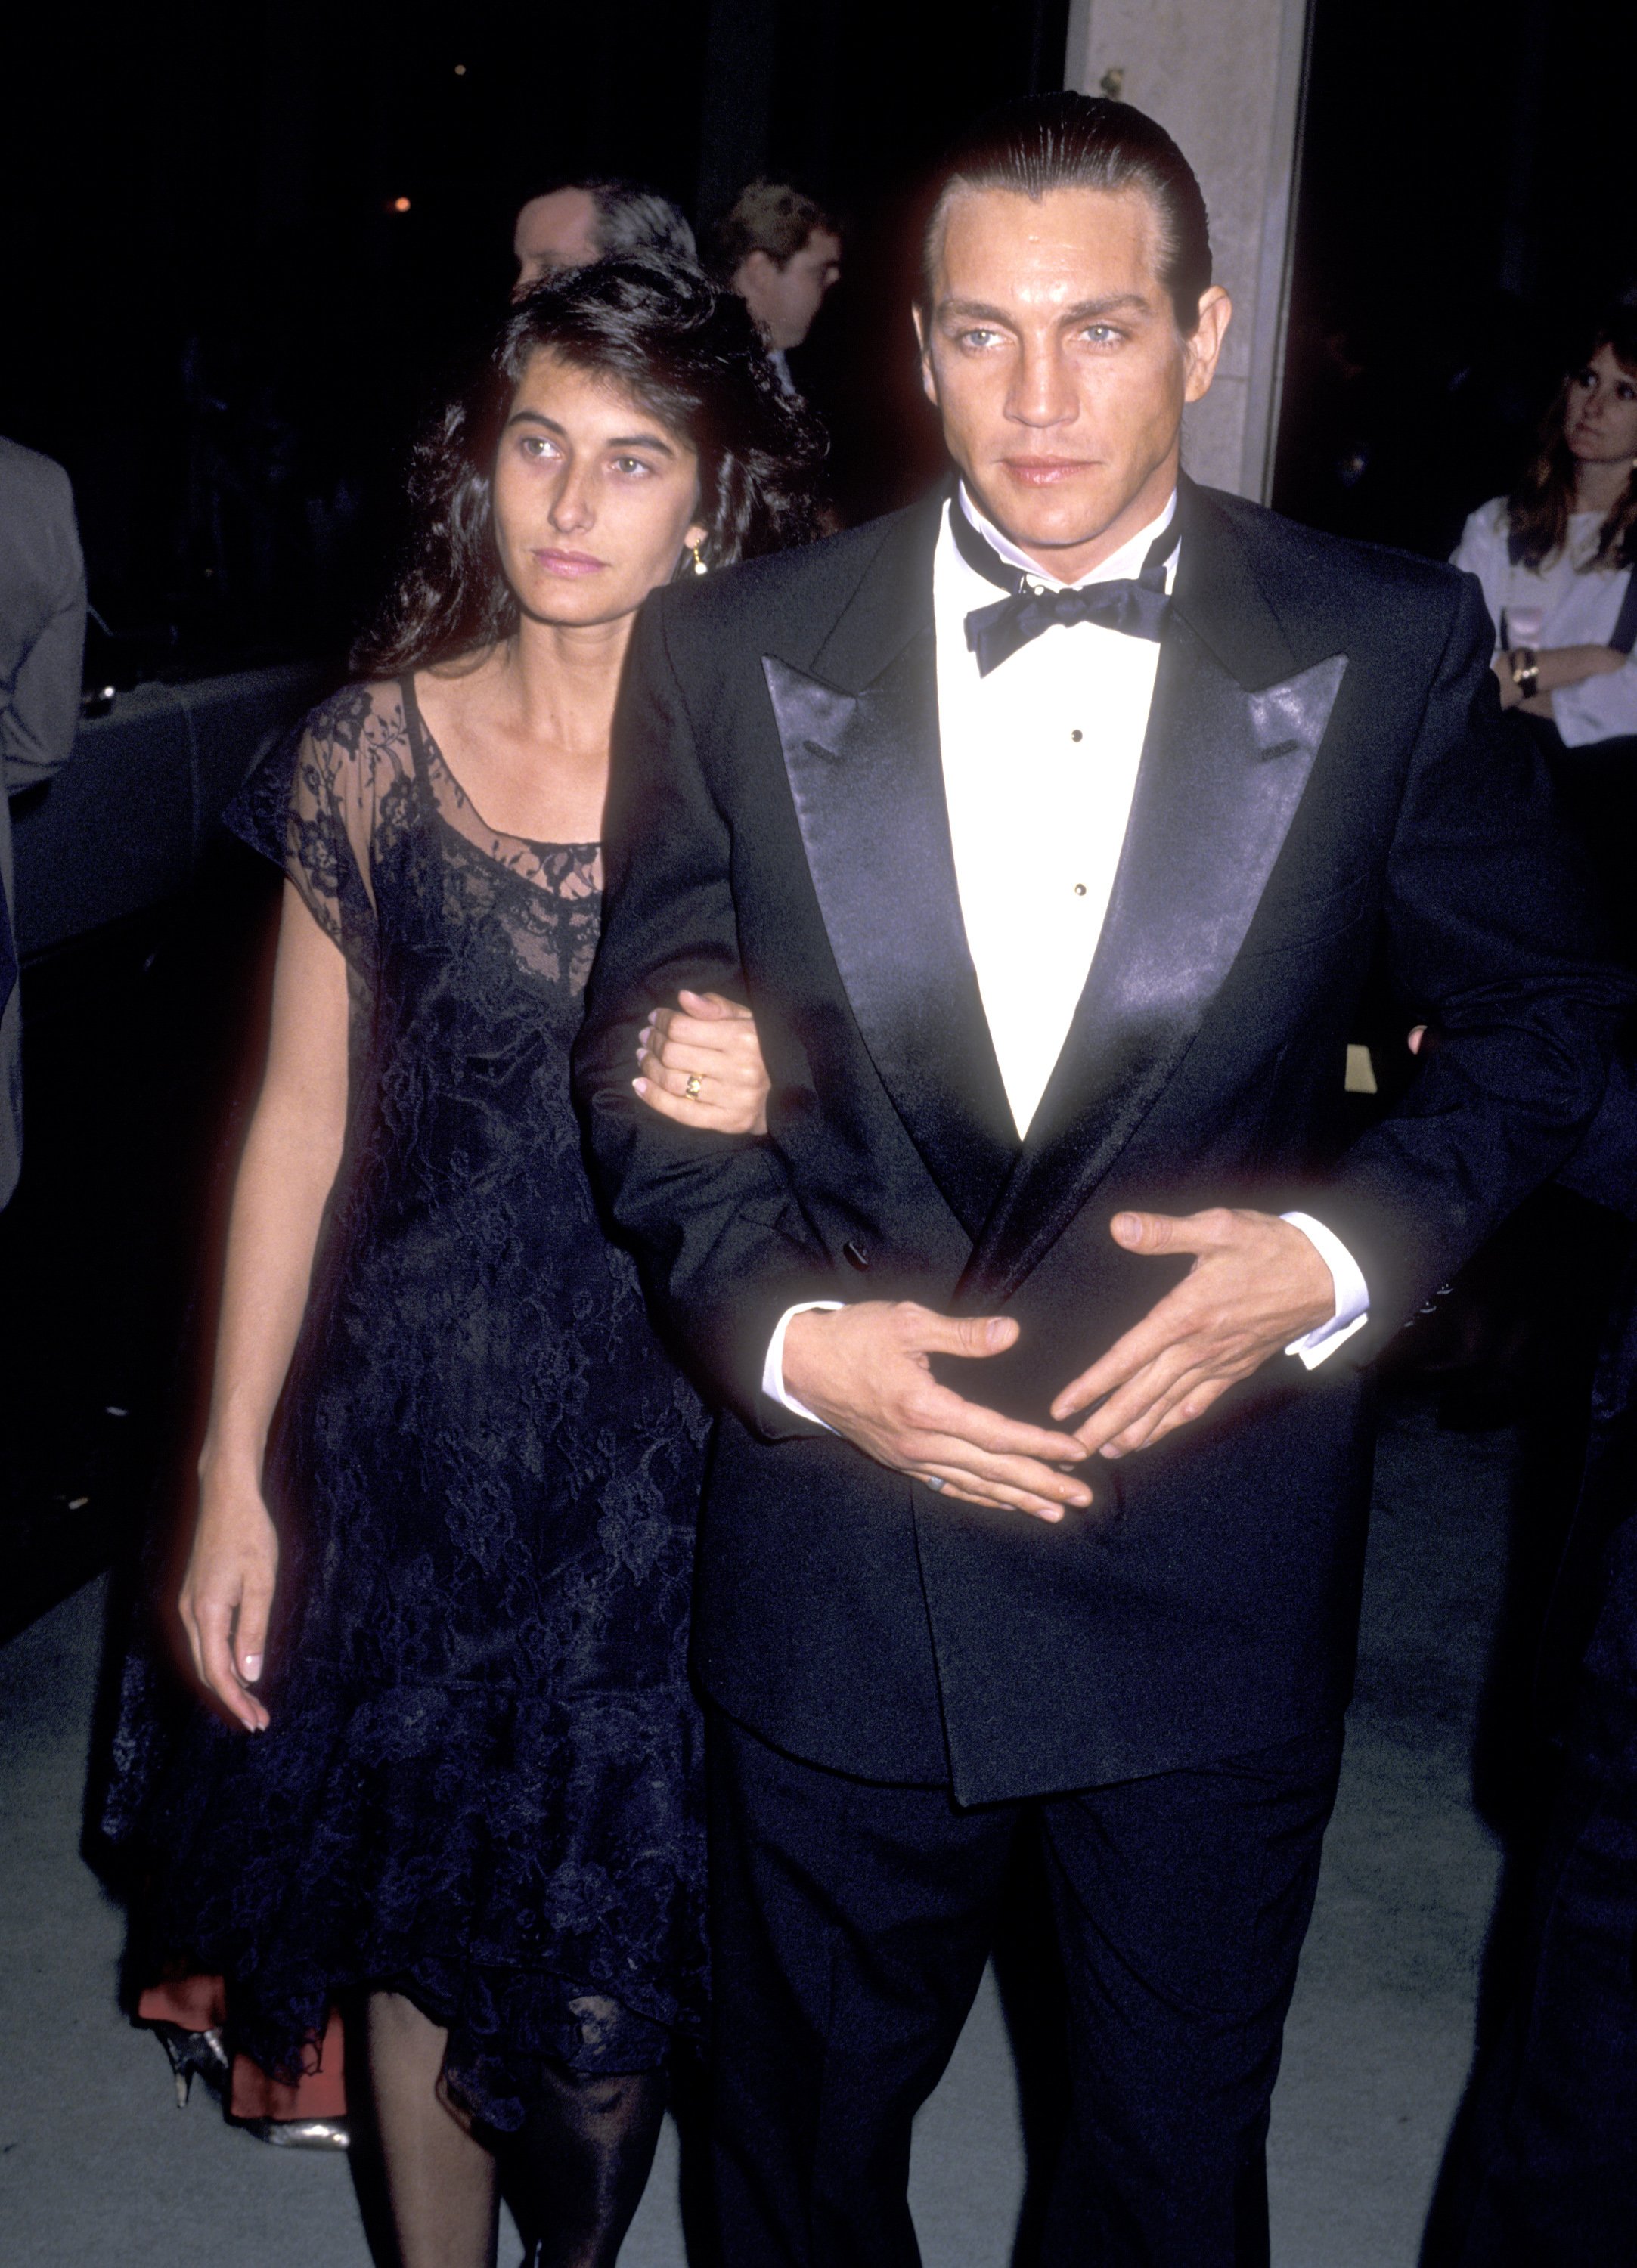 Eric Roberts and Kelly Cunningham during the 46th Annual Golden Globe Awards on January 28, 1989 at Beverly Hilton Hotel in Beverly Hills, California. | Source: Getty Images